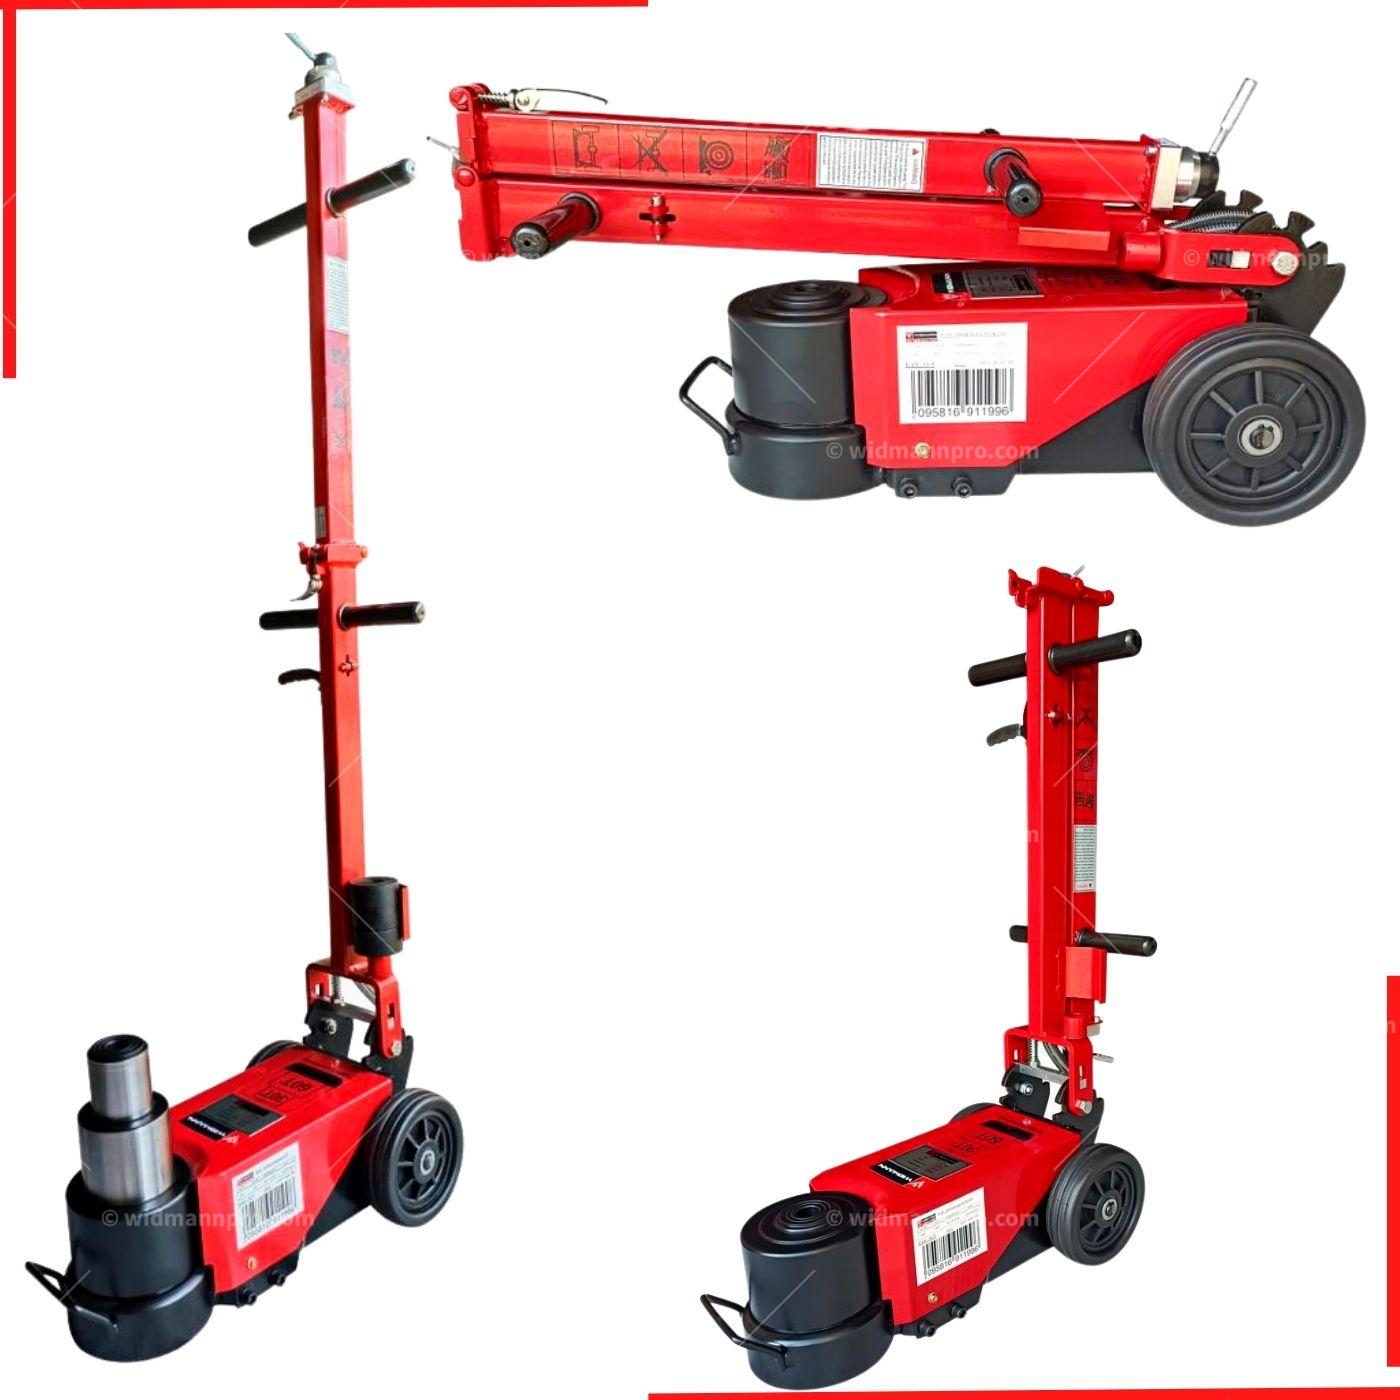 60 ton air hydraulic bottle jack for truck (5)